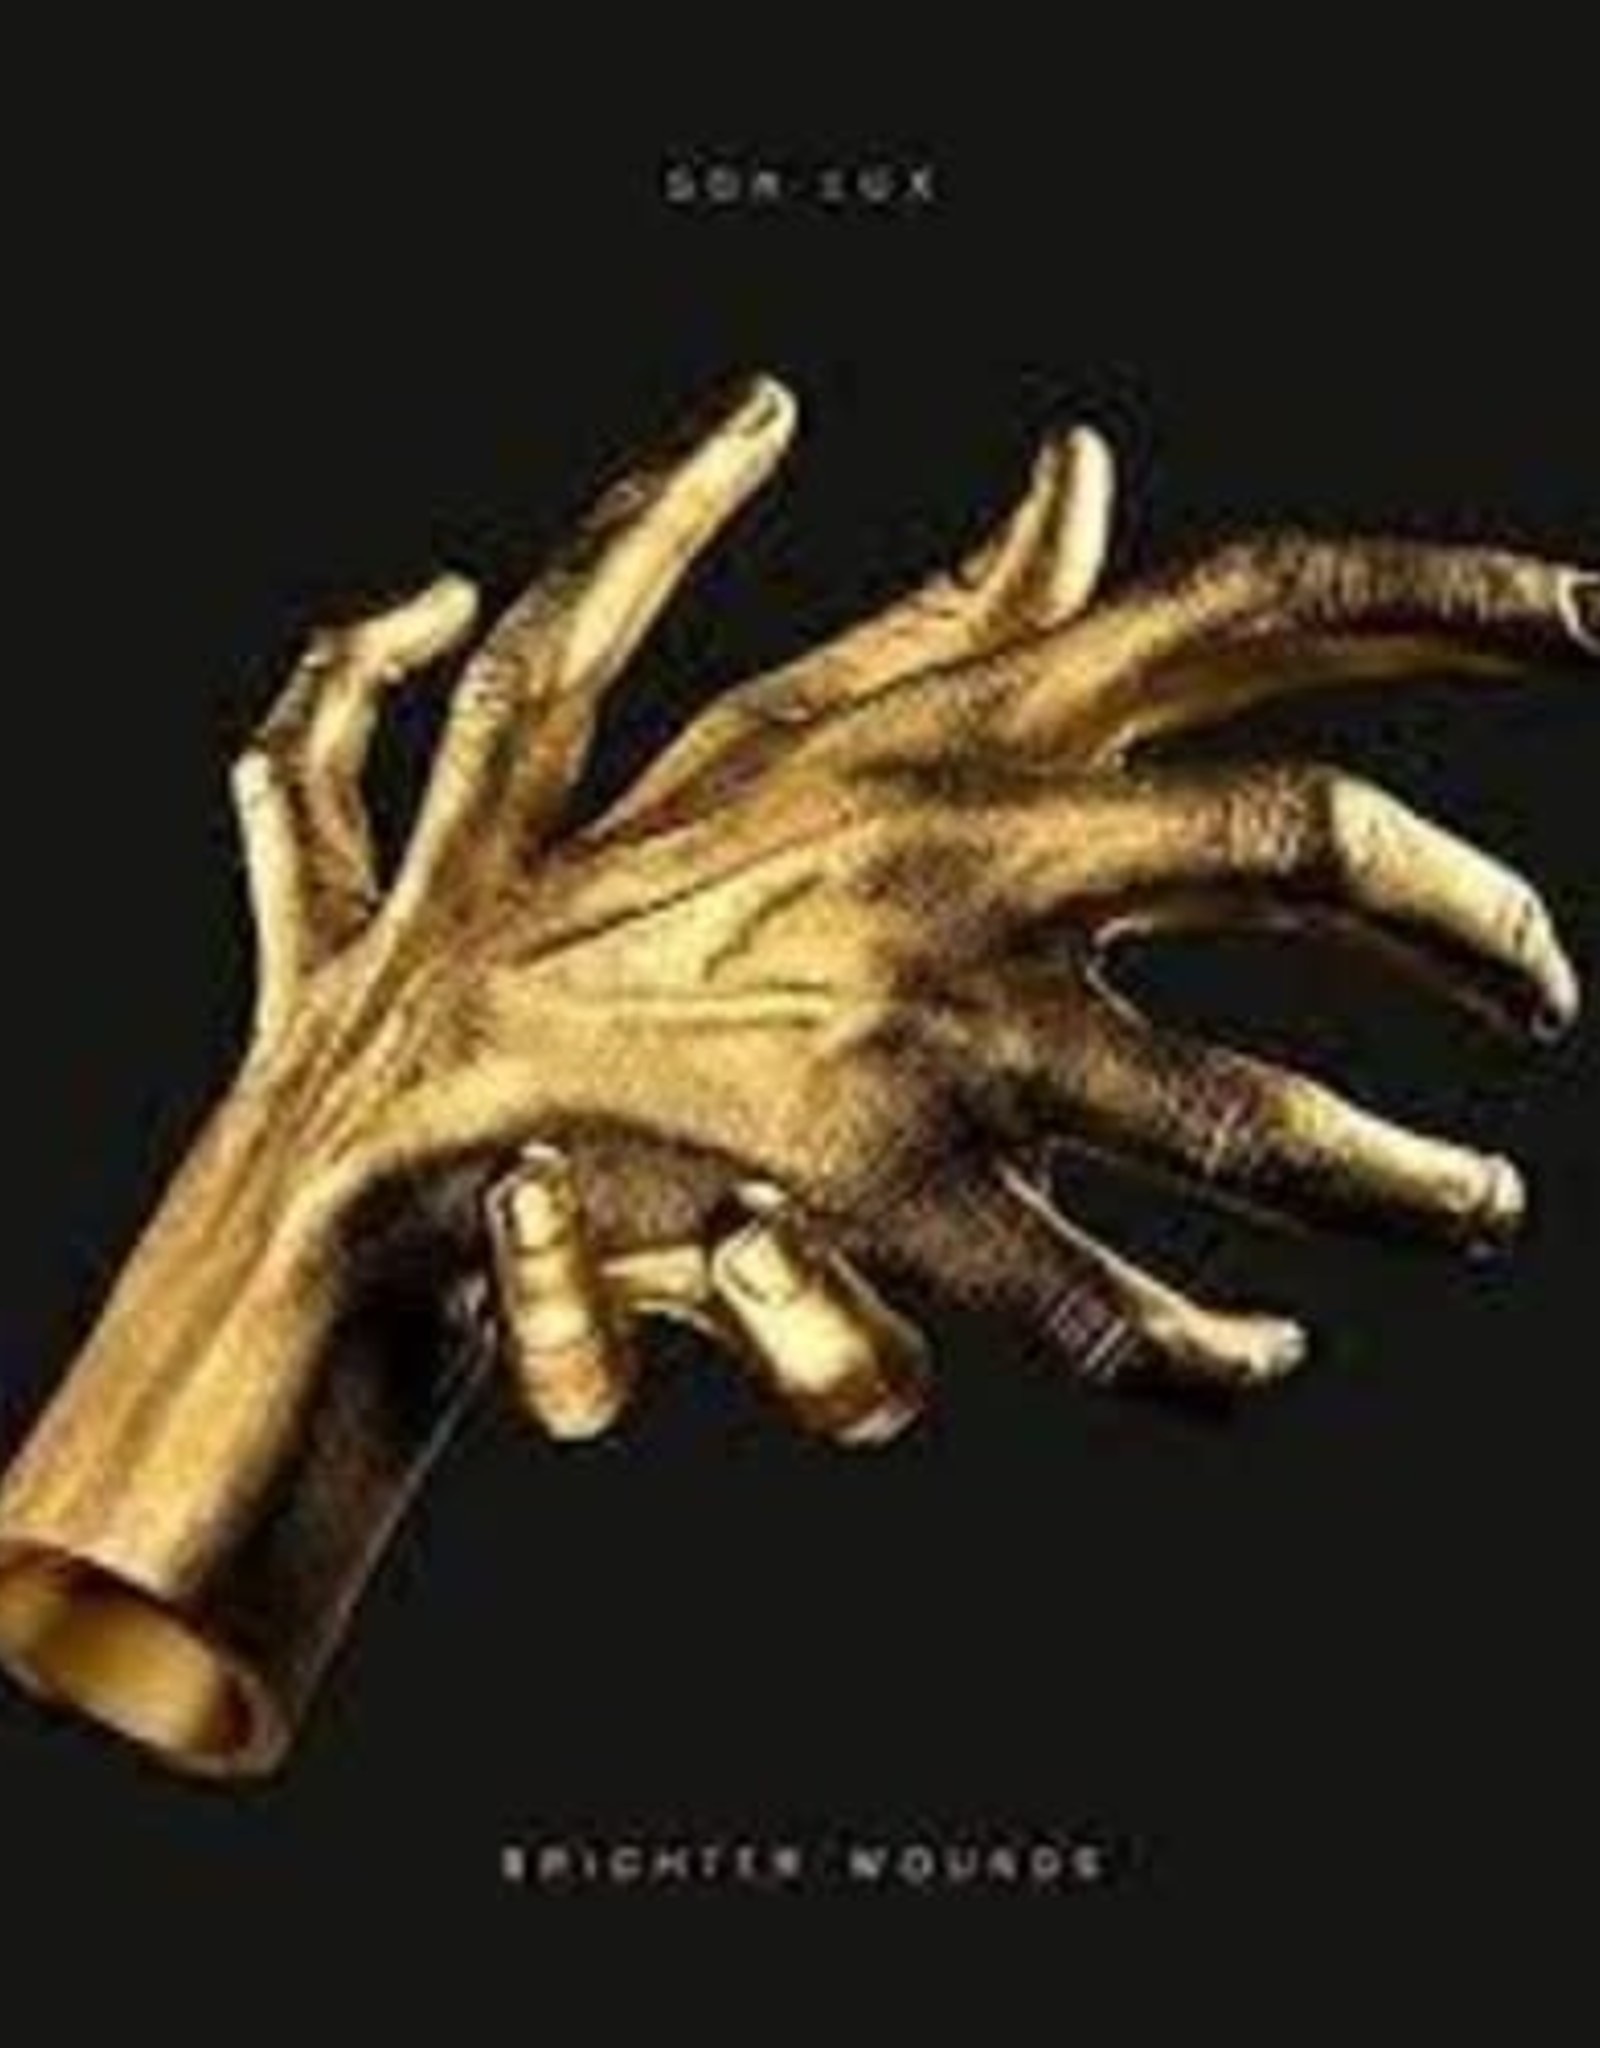 Son Lux - Brighter Wounds (GOLD VINYL)